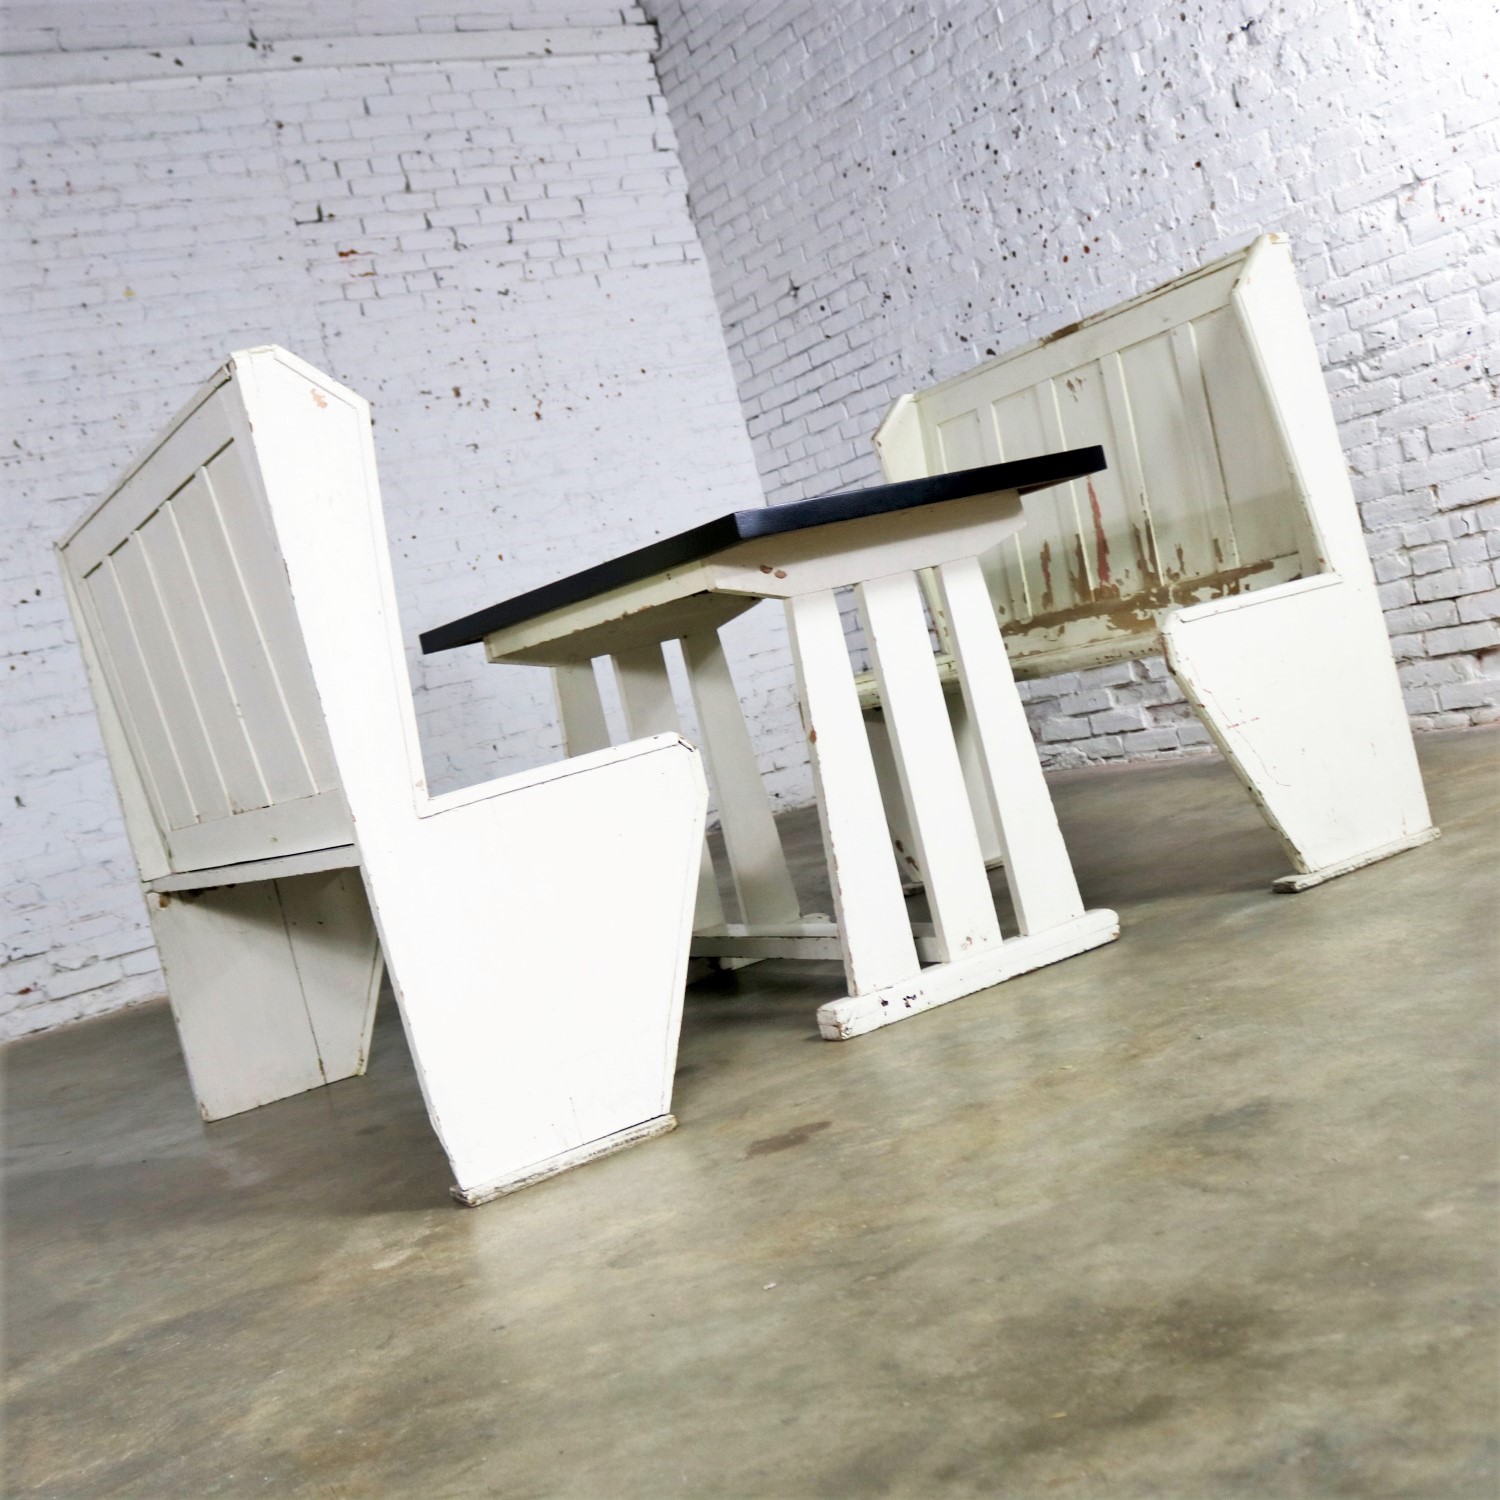 Rustic Arts and Crafts Black and White Diner Booth Banquette Table and Benches